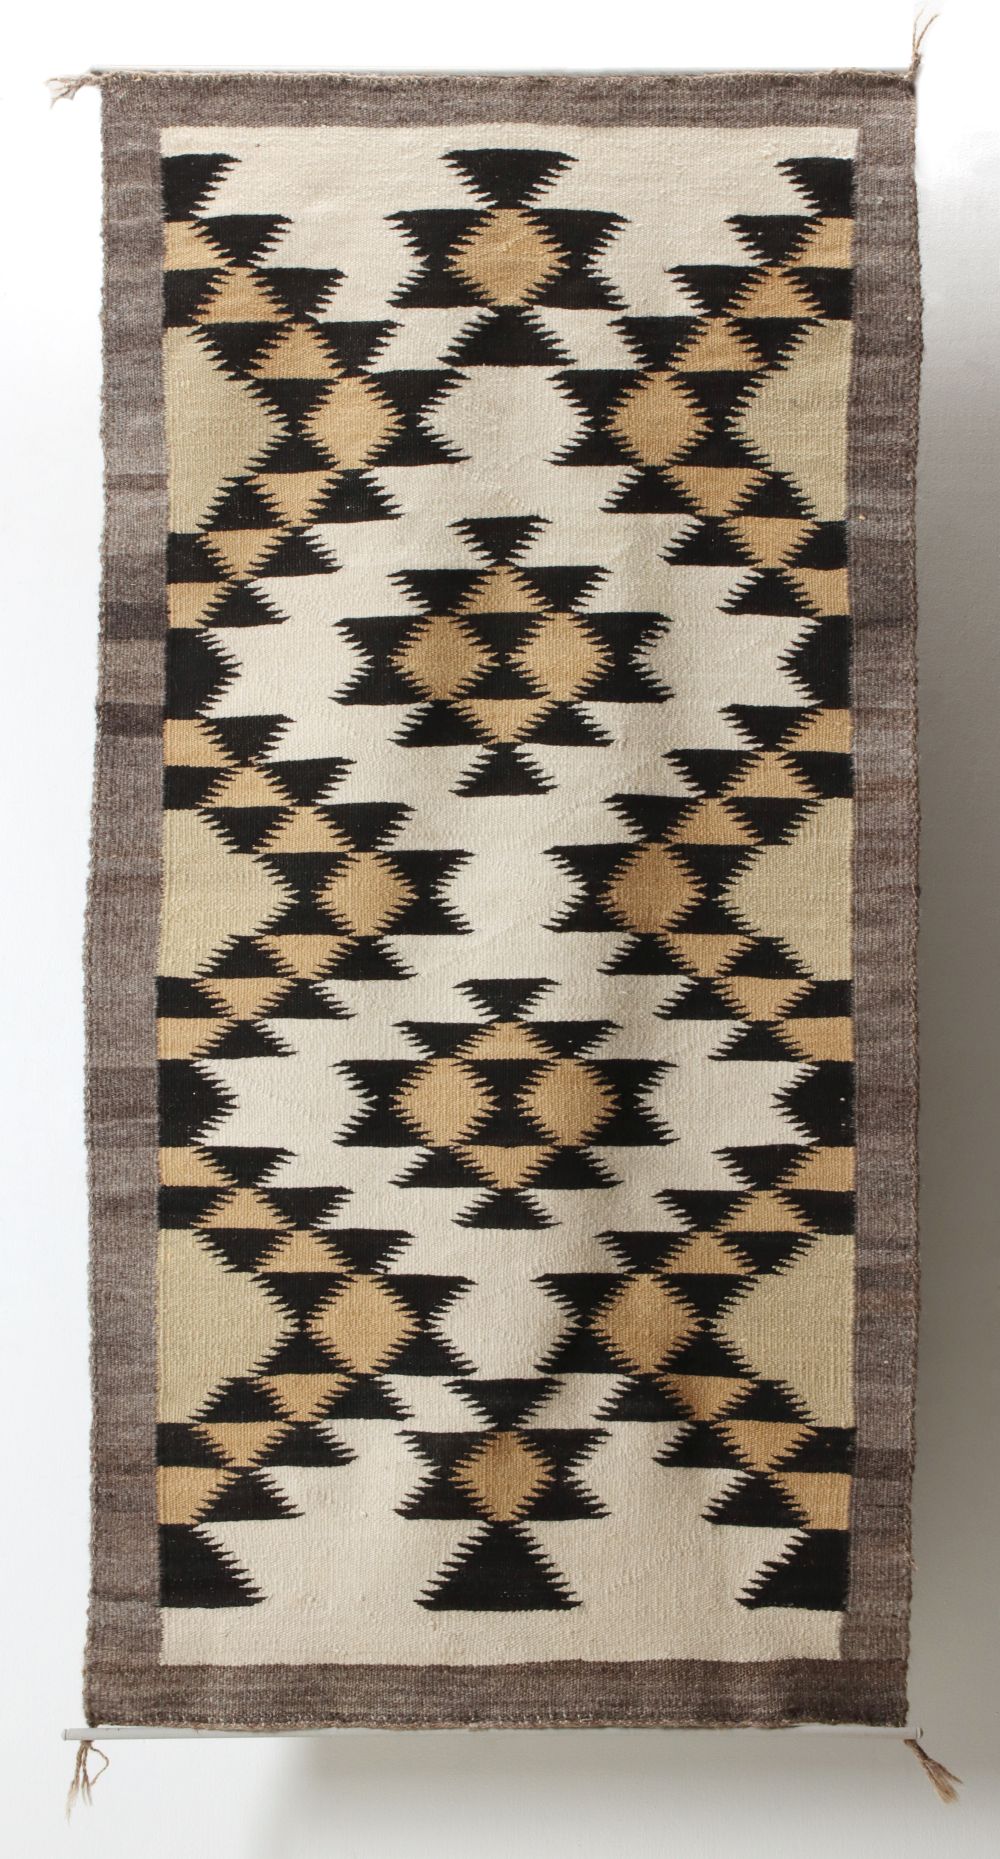 A NAVAJO WEAVING WITH SERRATED DESIGNS